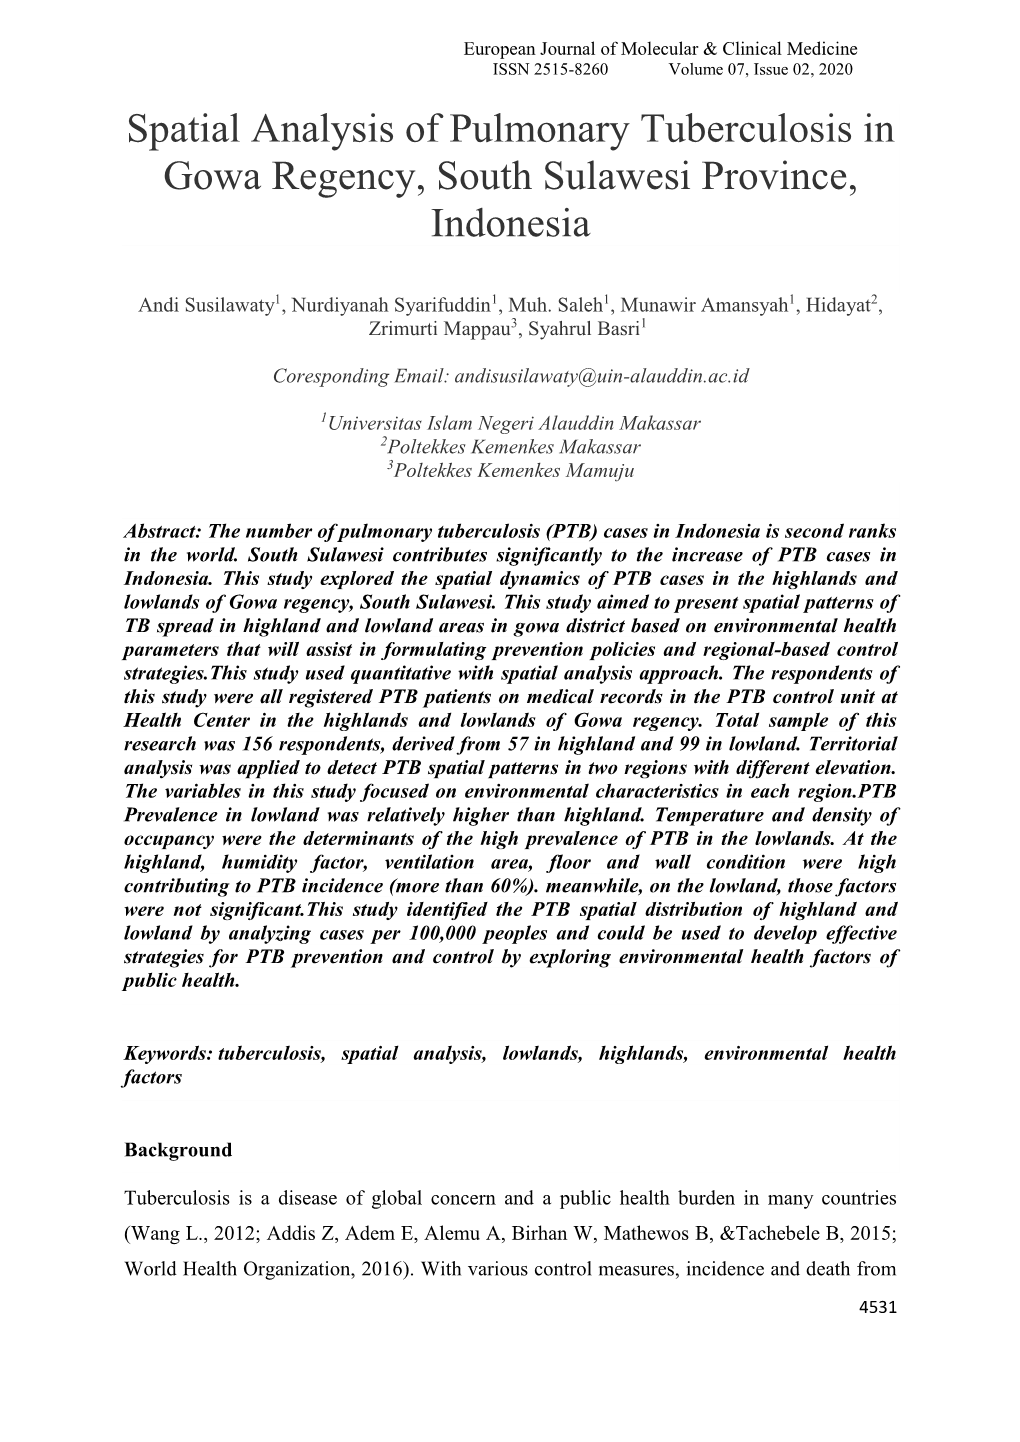 Spatial Analysis of Pulmonary Tuberculosis in Gowa Regency, South Sulawesi Province, Indonesia